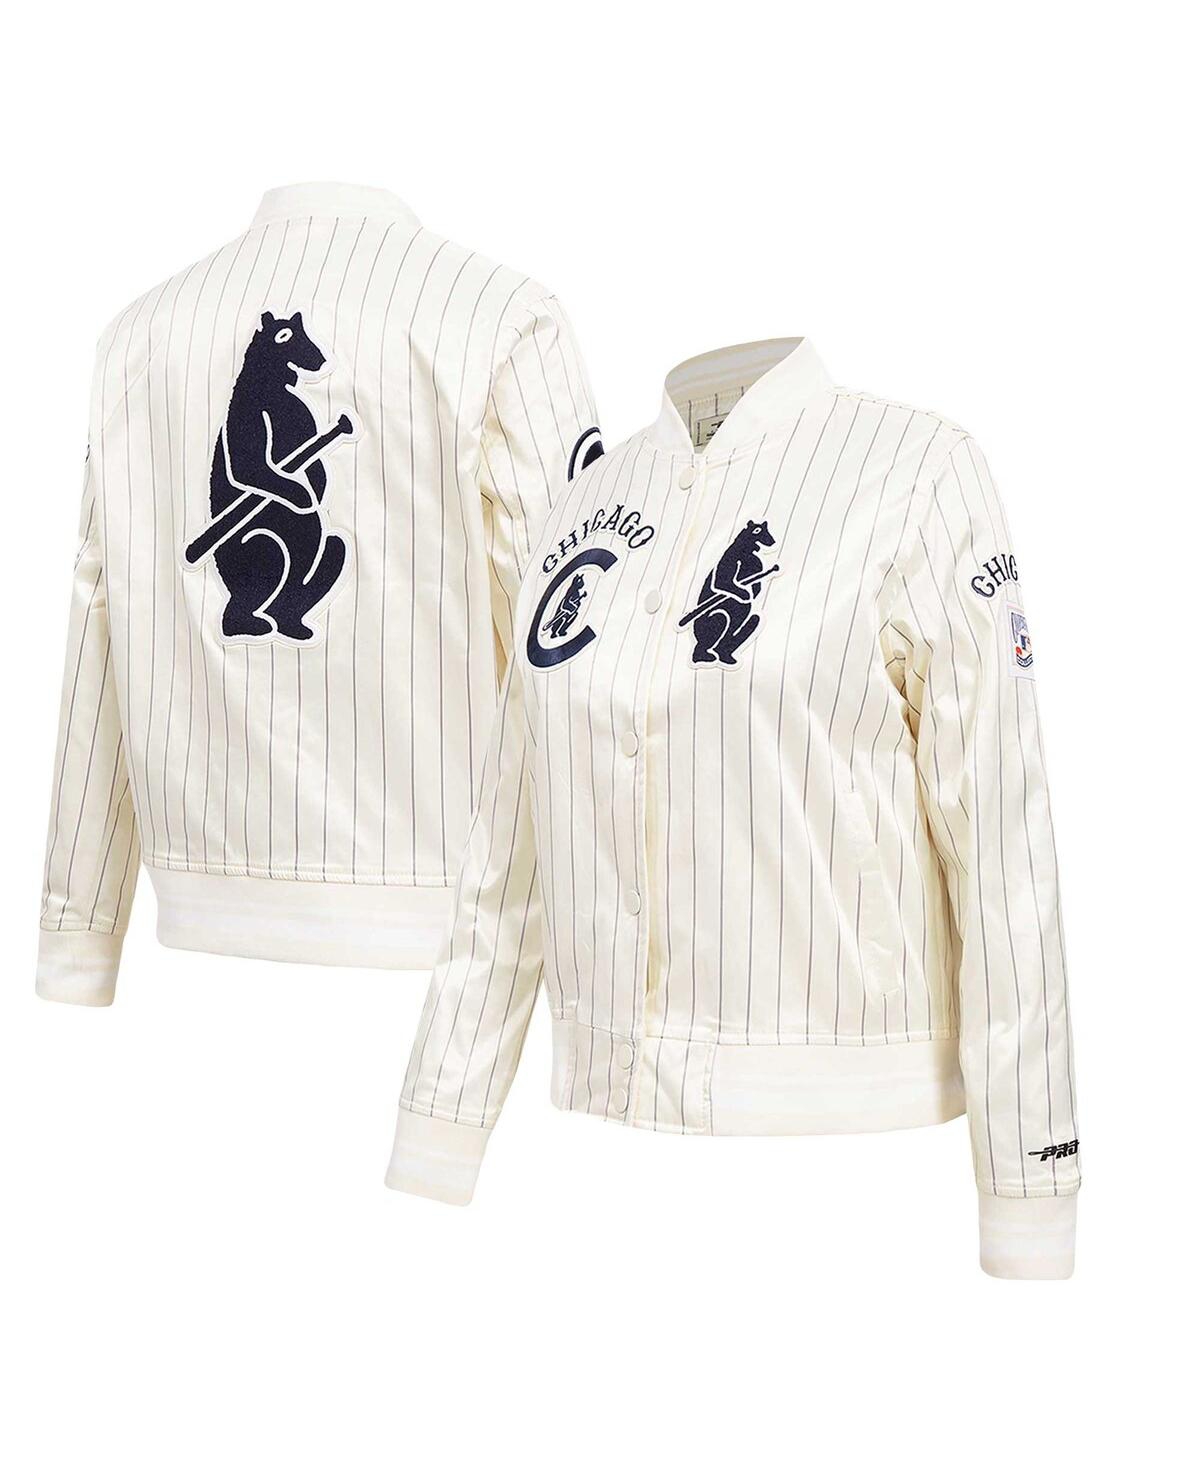 Men's Cream Chicago Cubs Cooperstown Collection Pinstripe Retro Classic Full-Button Satin Jacket - Cream